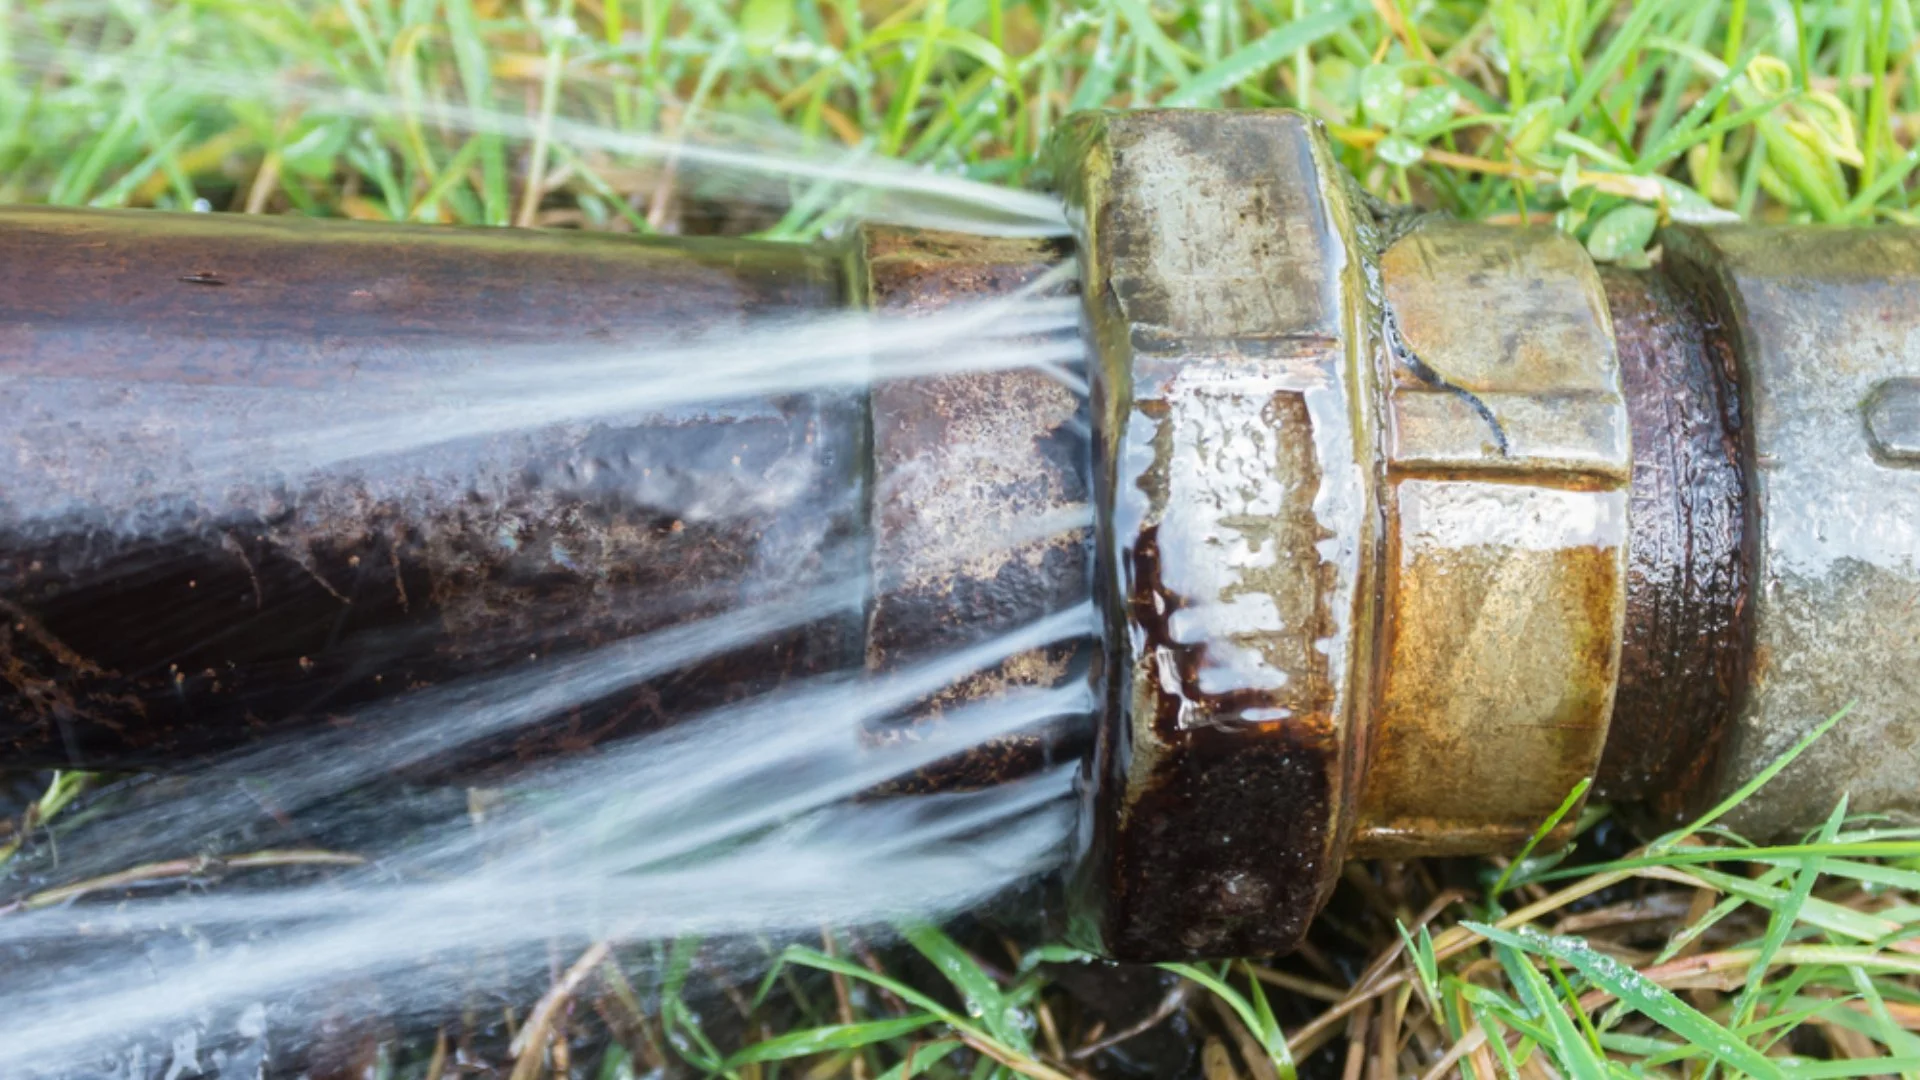 How to Tell if There Is a Leak in Your Irrigation System